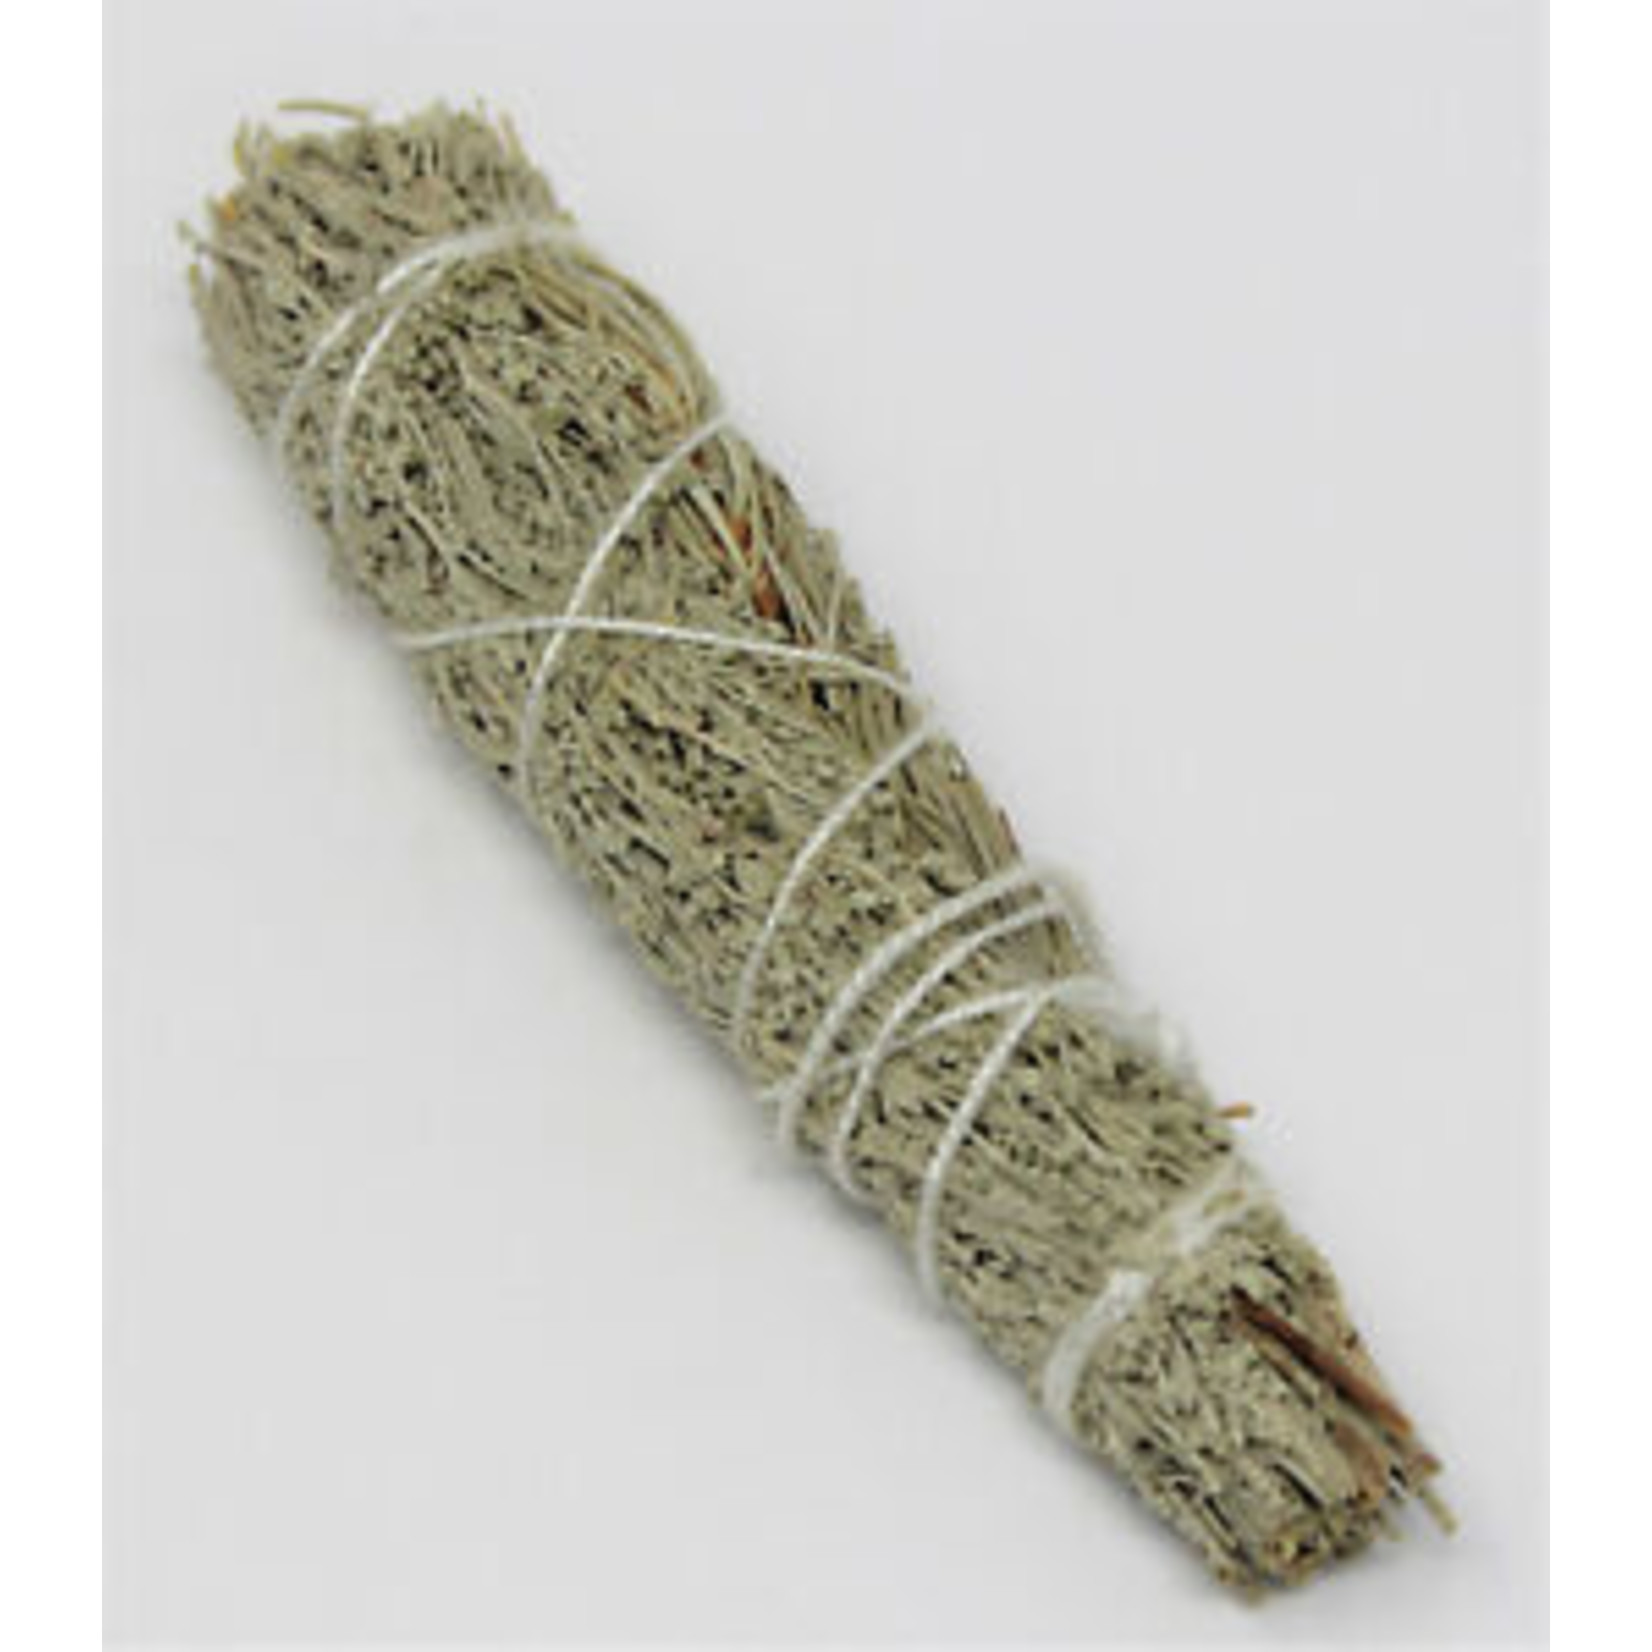 7" Sage and Pine Smudge Stick - High Mountain Valley Cleansing for Body & Mind Balance